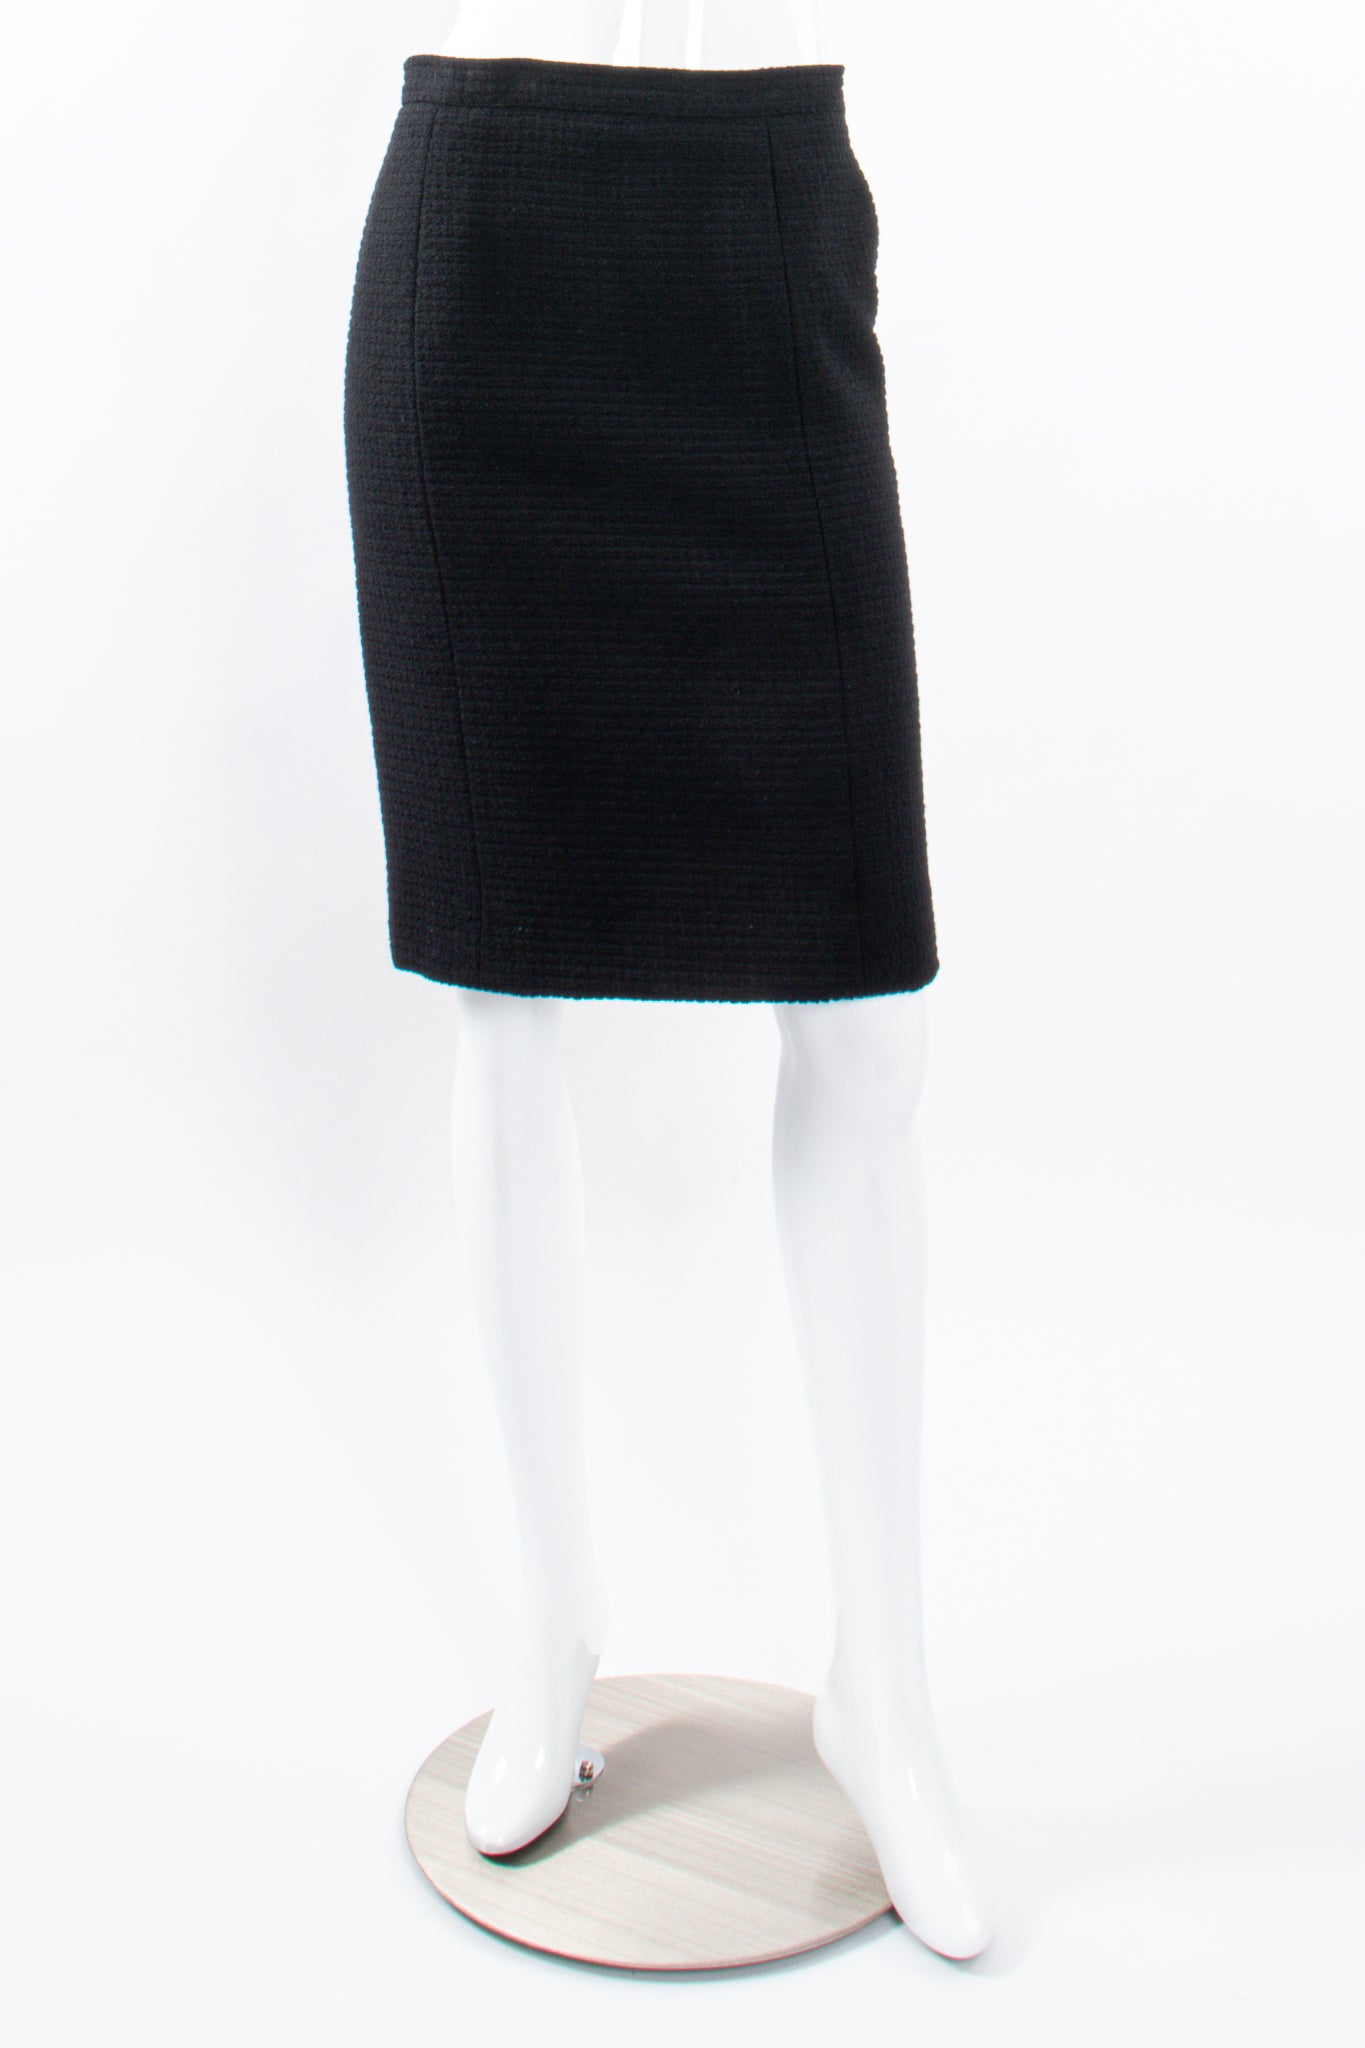 Vintage Chanel Monochrome Tweed Boxy Jacket and Skirt Set skirt front on Mannequin at Recess LA